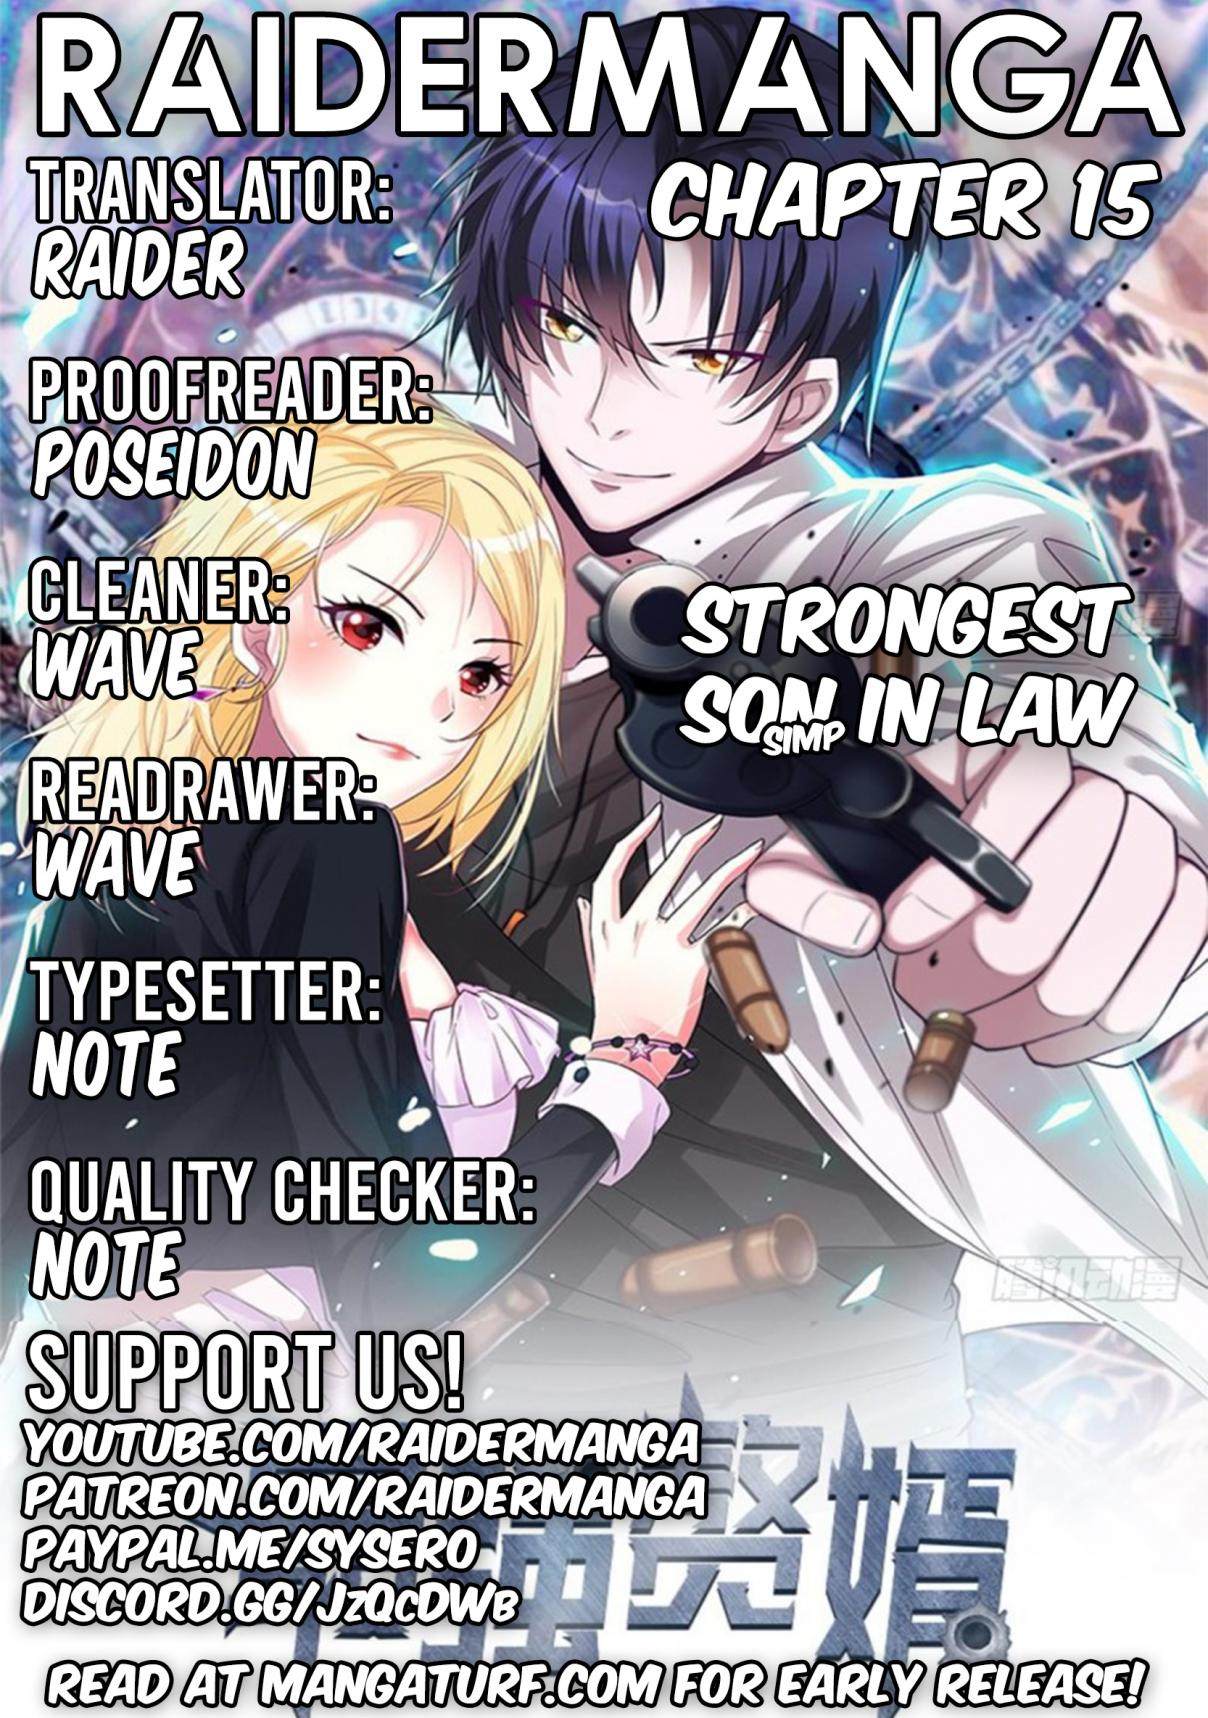 Strongest Son in Law Ch. 15